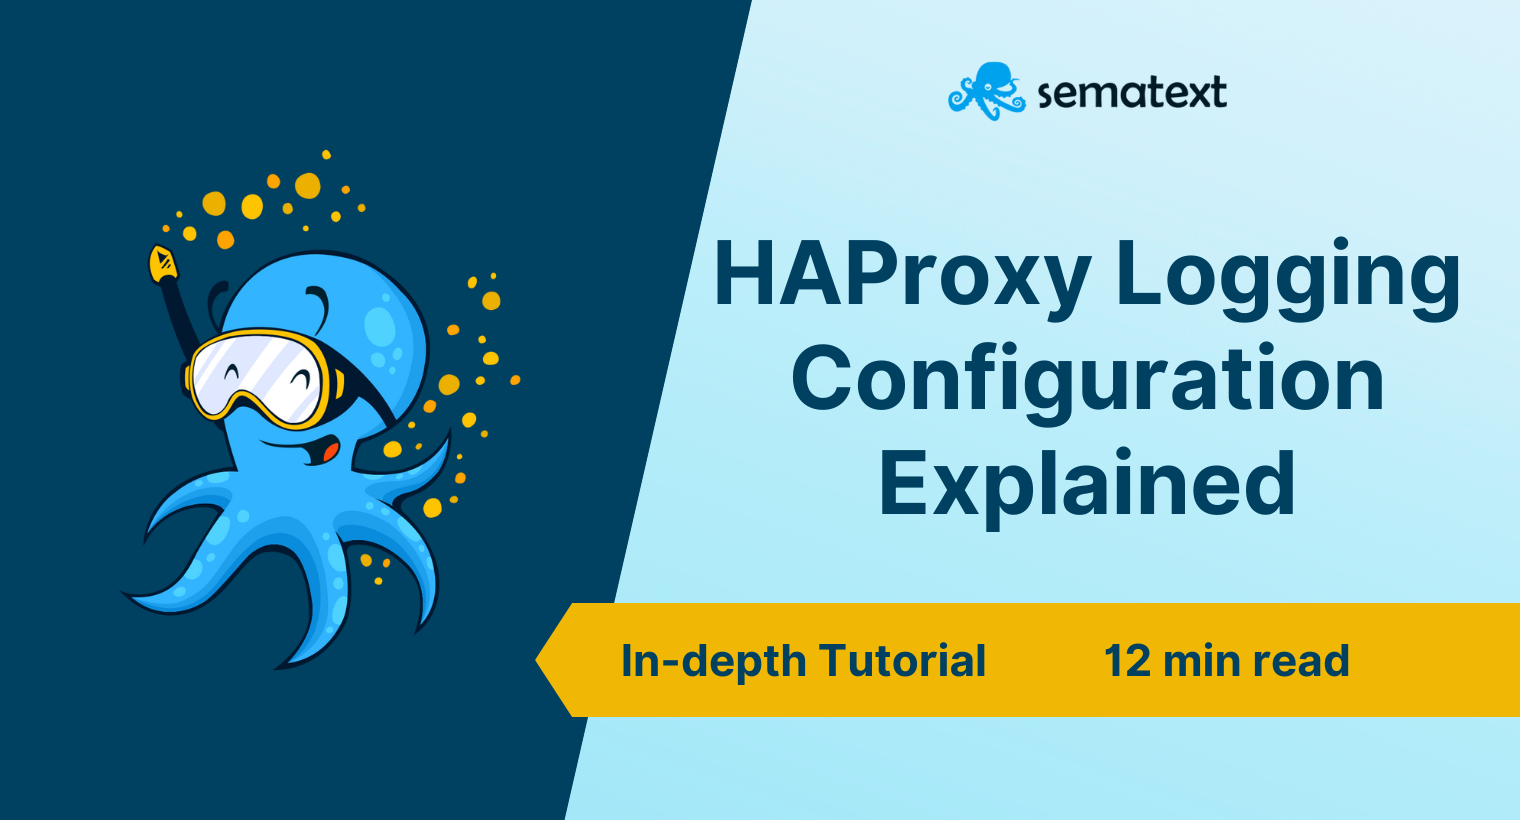 HAProxy Logging Configuration Explained: How to Enable and View Log Files